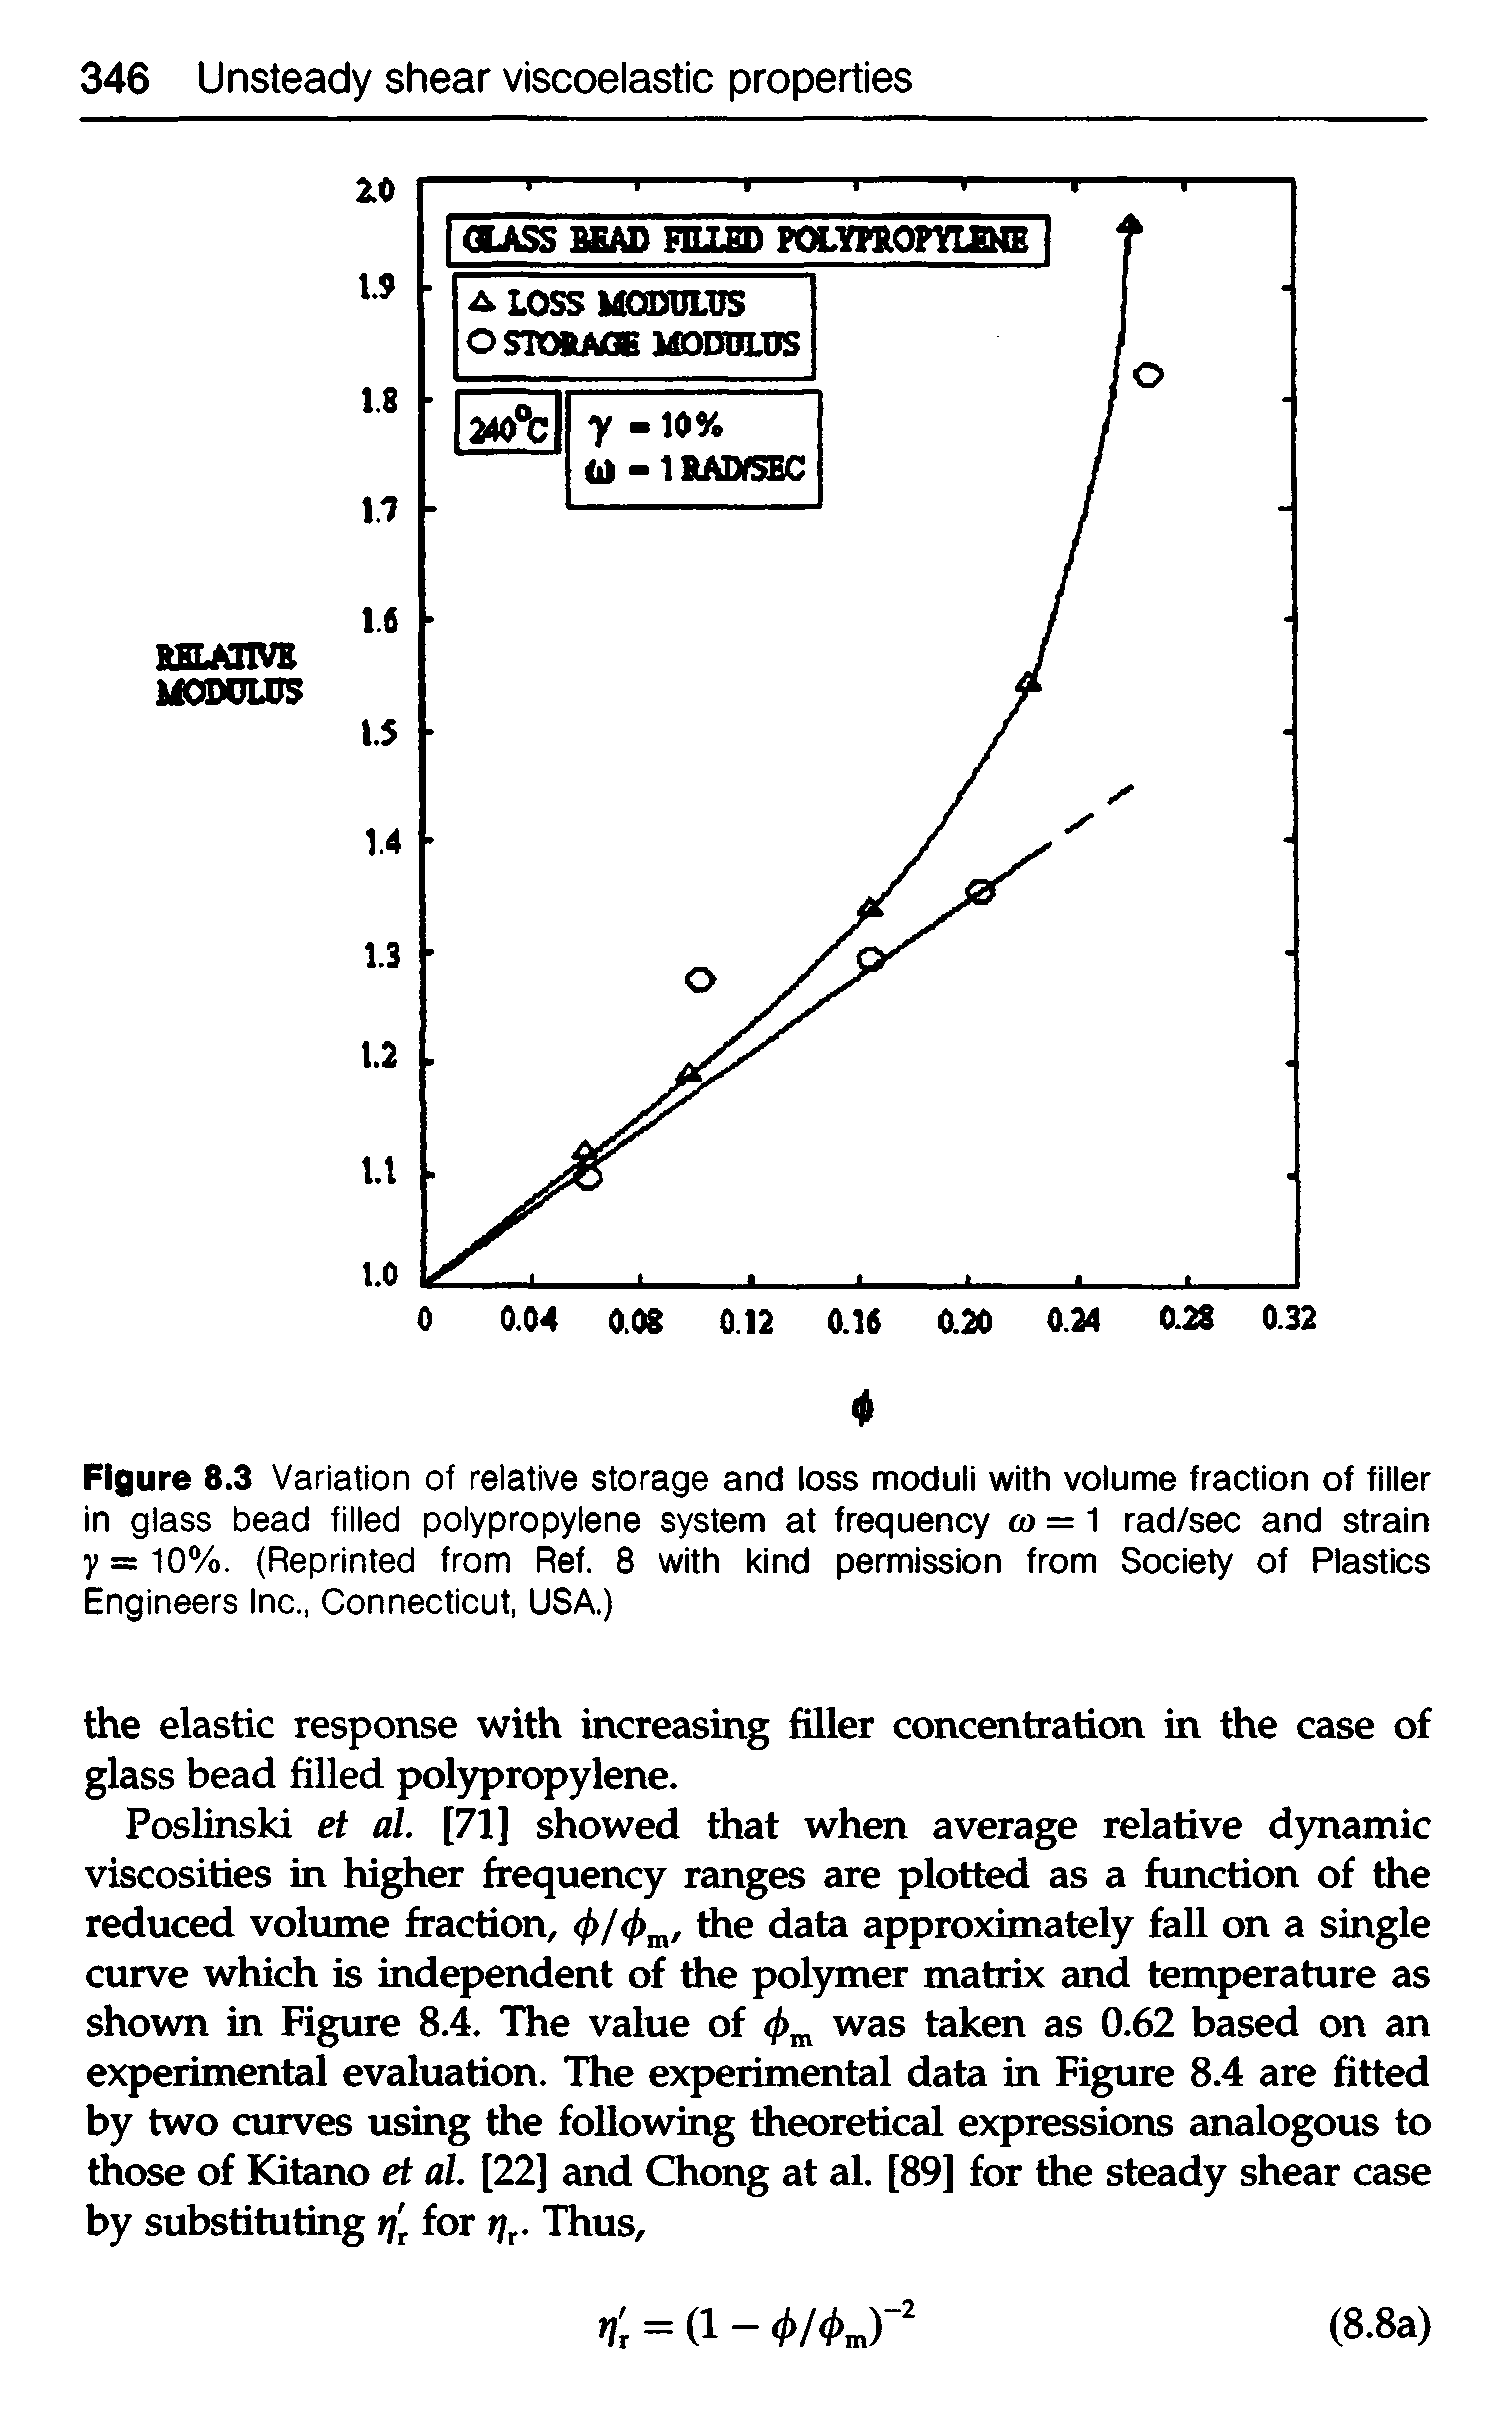 Figure 8.3 Variation of relative storage and loss moduli with volume fraction of filler in glass bead filled polypropylene system at frequency to = 1 rad/sec and strain y = 10%. (Reprinted from Ref. 8 with kind permission from Society of Plastics Engineers Inc., Connecticut, USA.)...